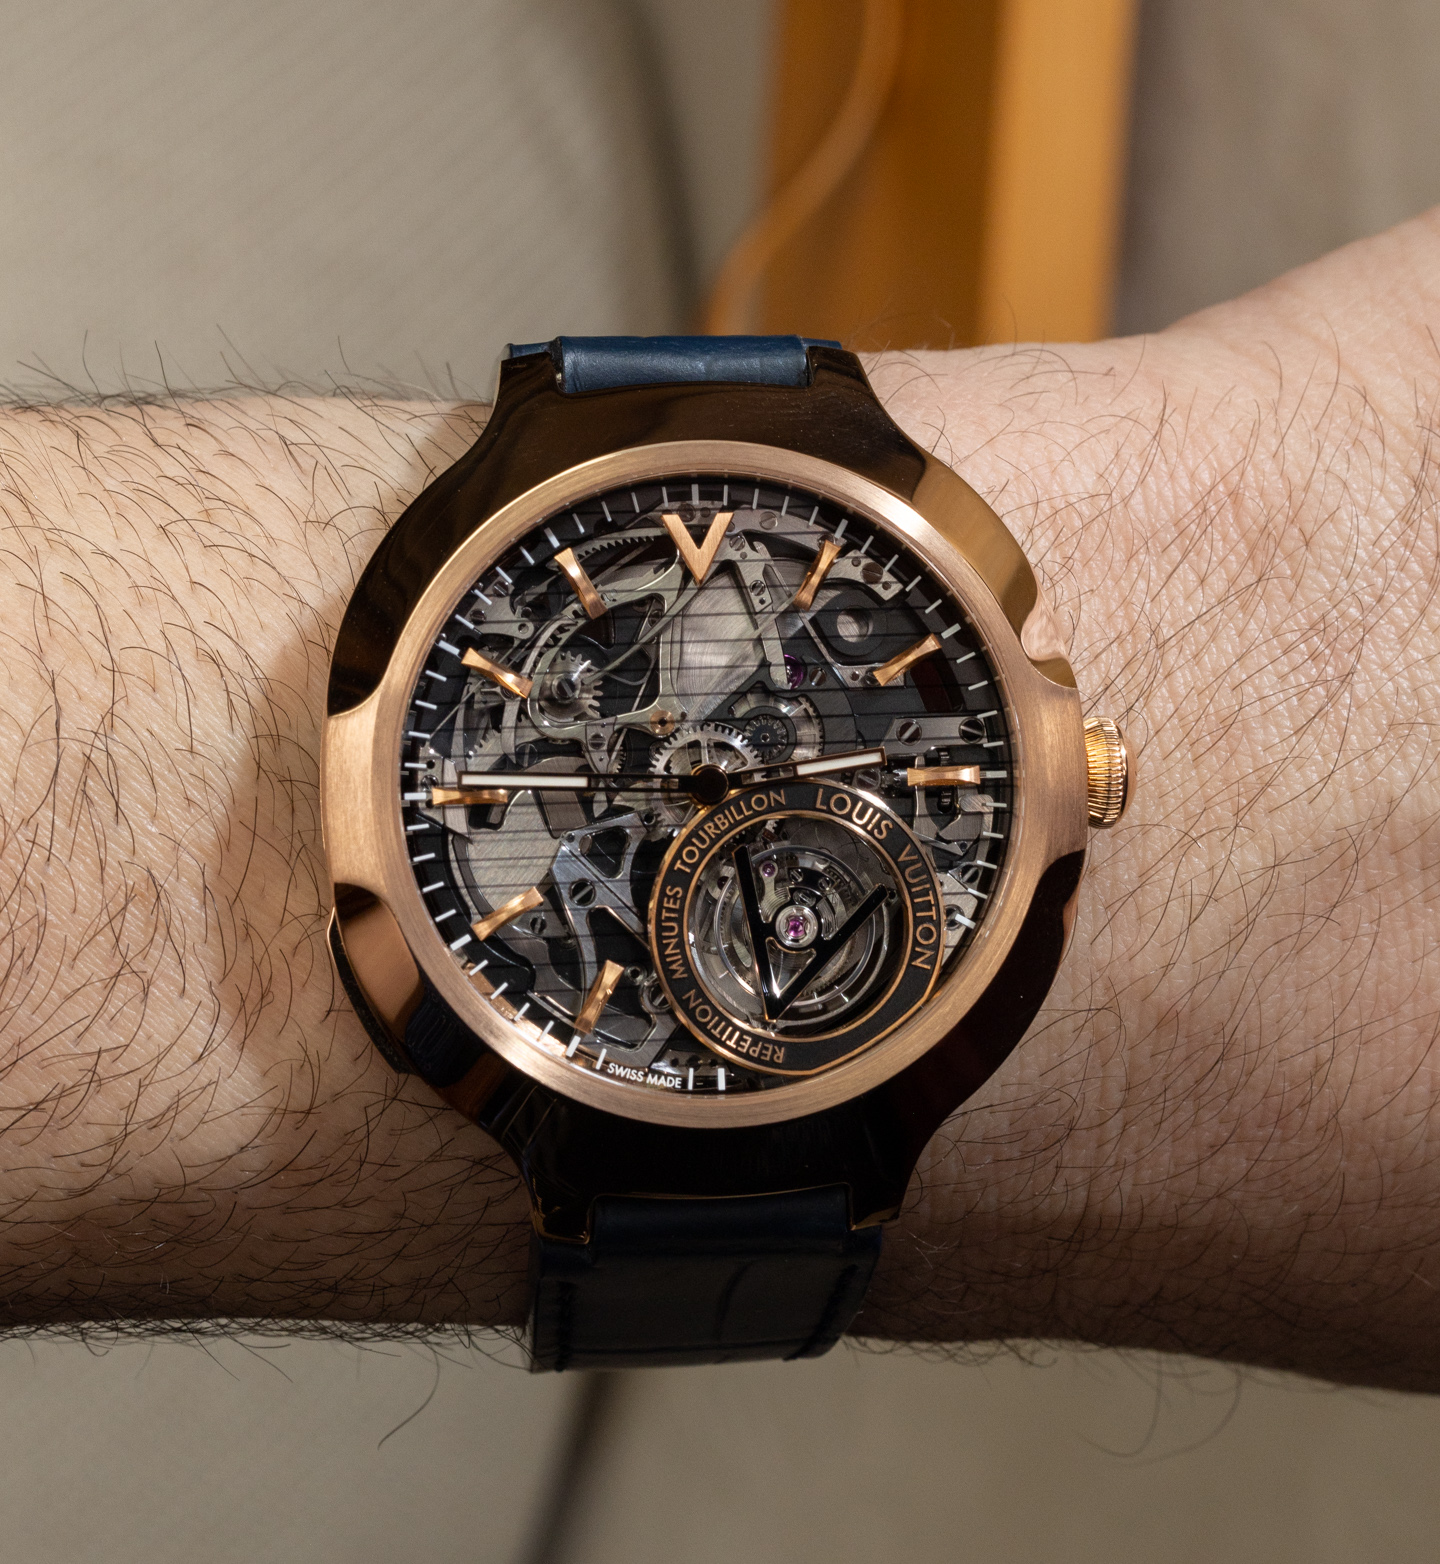 Introducing the Louis Vuitton Voyager Minute Repeater Flying